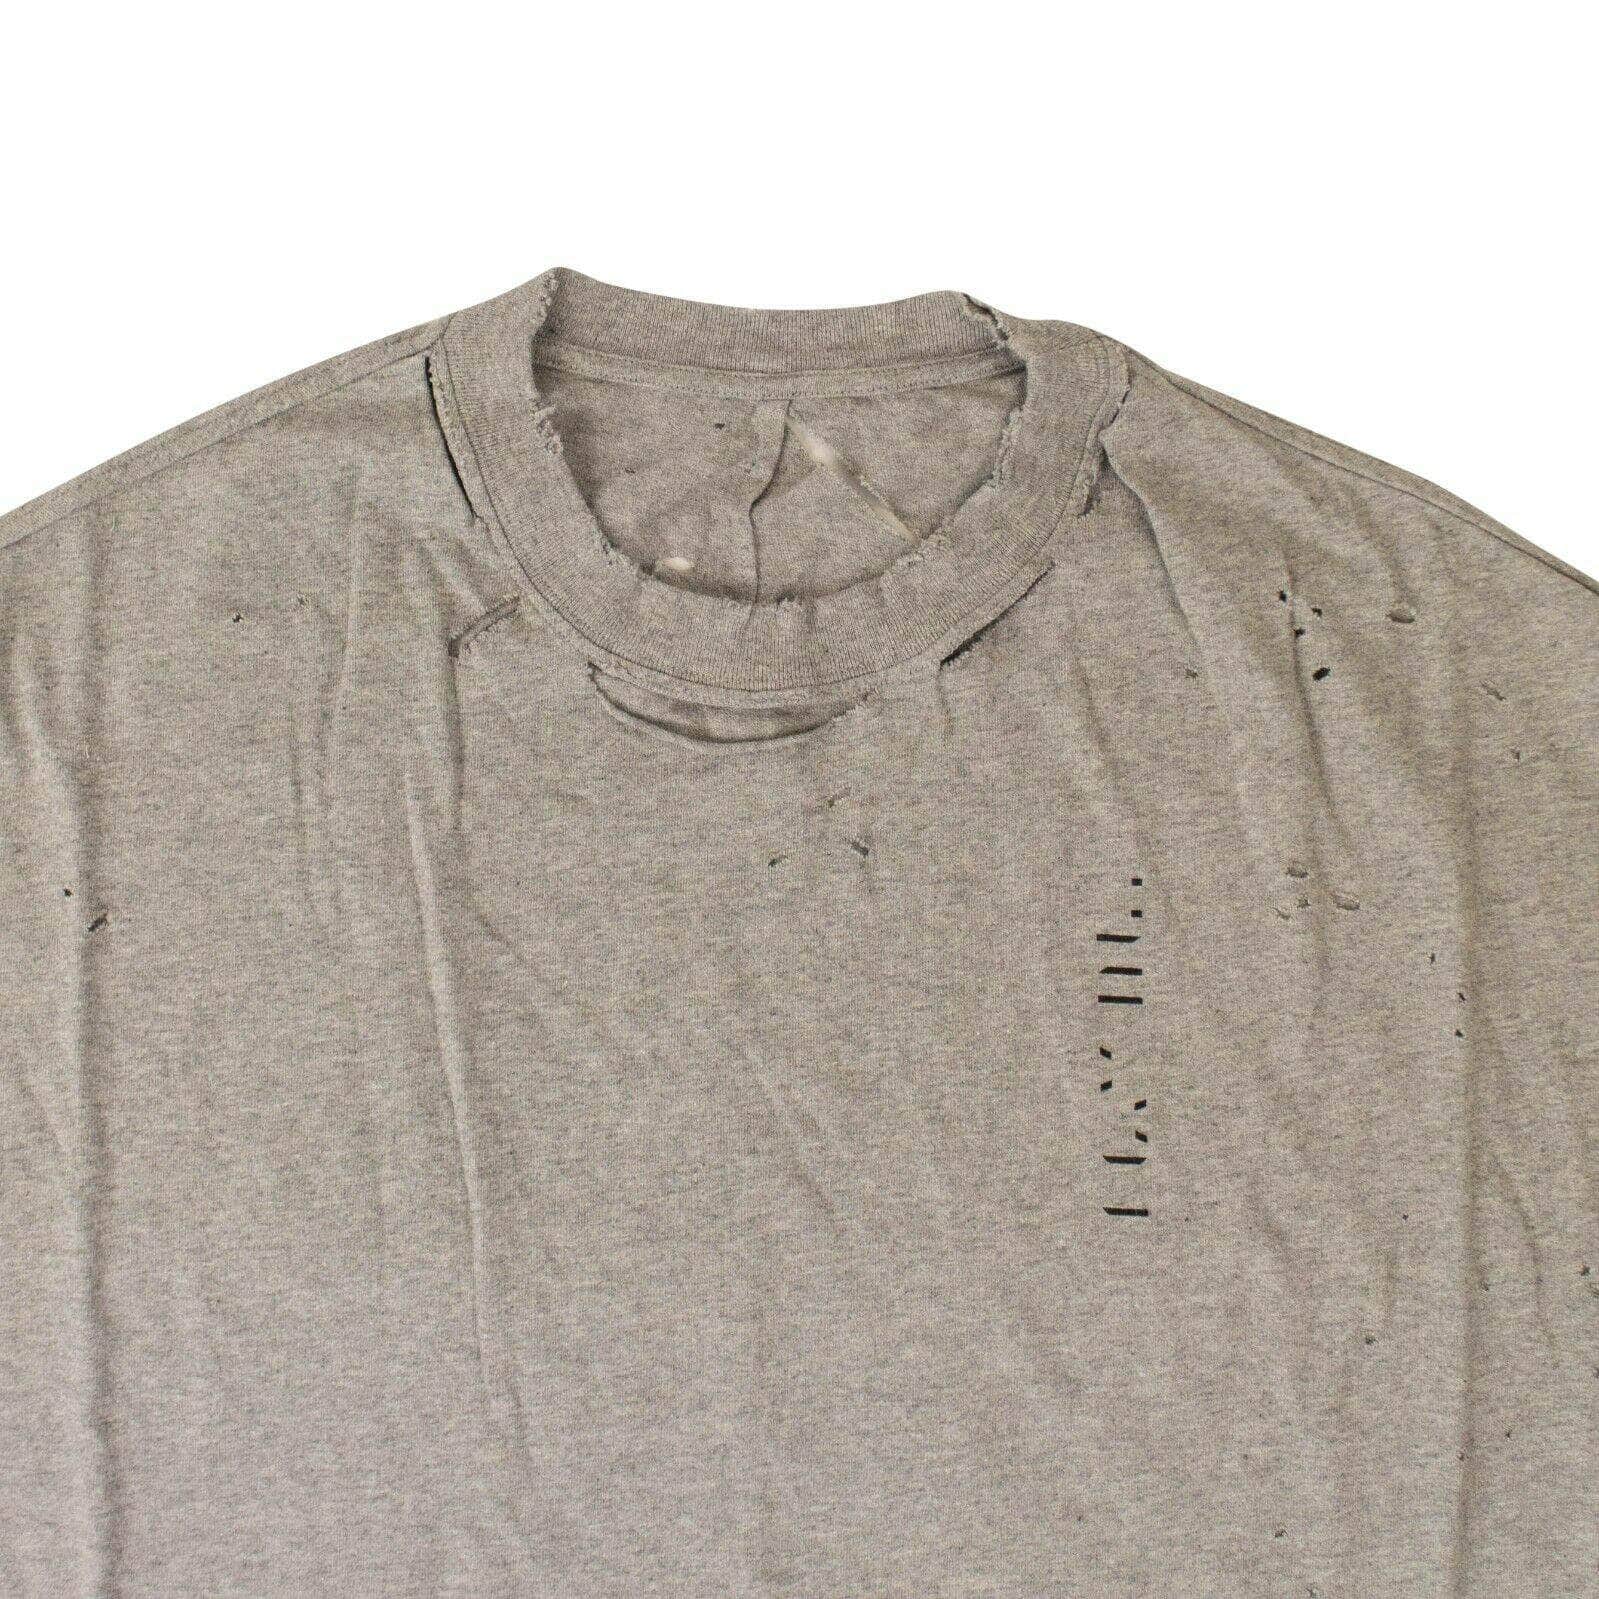 Unravel Project channelenable-all, chicmi, couponcollection, gender-mens, main-clothing, size-l, size-m, size-s, size-xs, under-250, unravel-project Gray Distressed T-Shirt